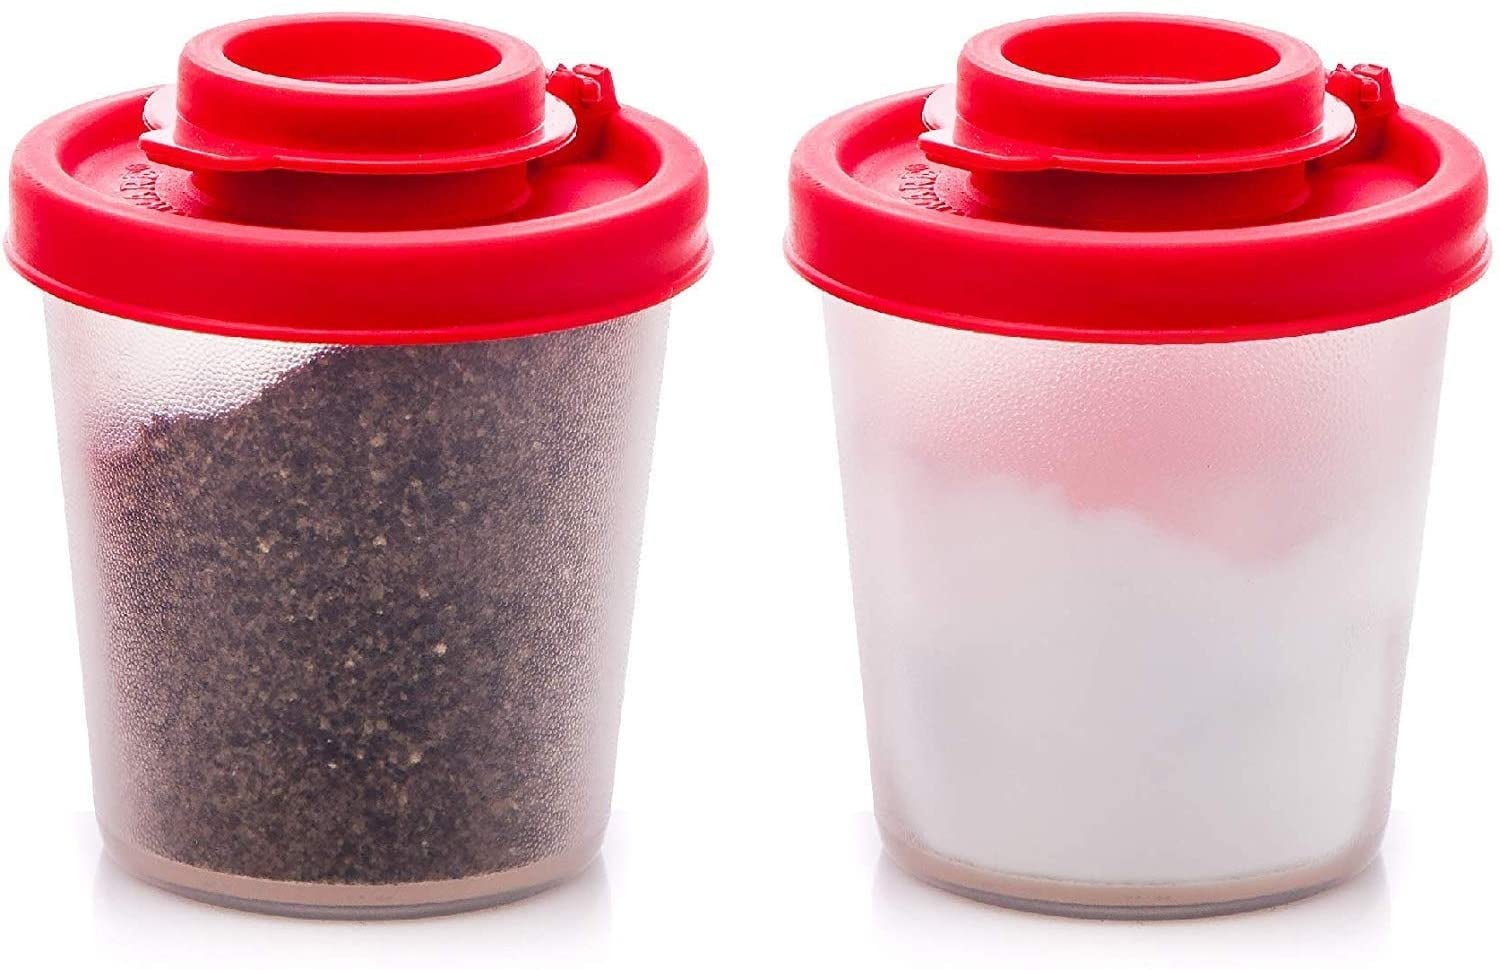 3.5 oz Red Set of 2 Seasoning Container Pourer with Shaker Lids Plastic Salt and Pepper Shakers with Lid Moisture Proof Spice Dispenser 